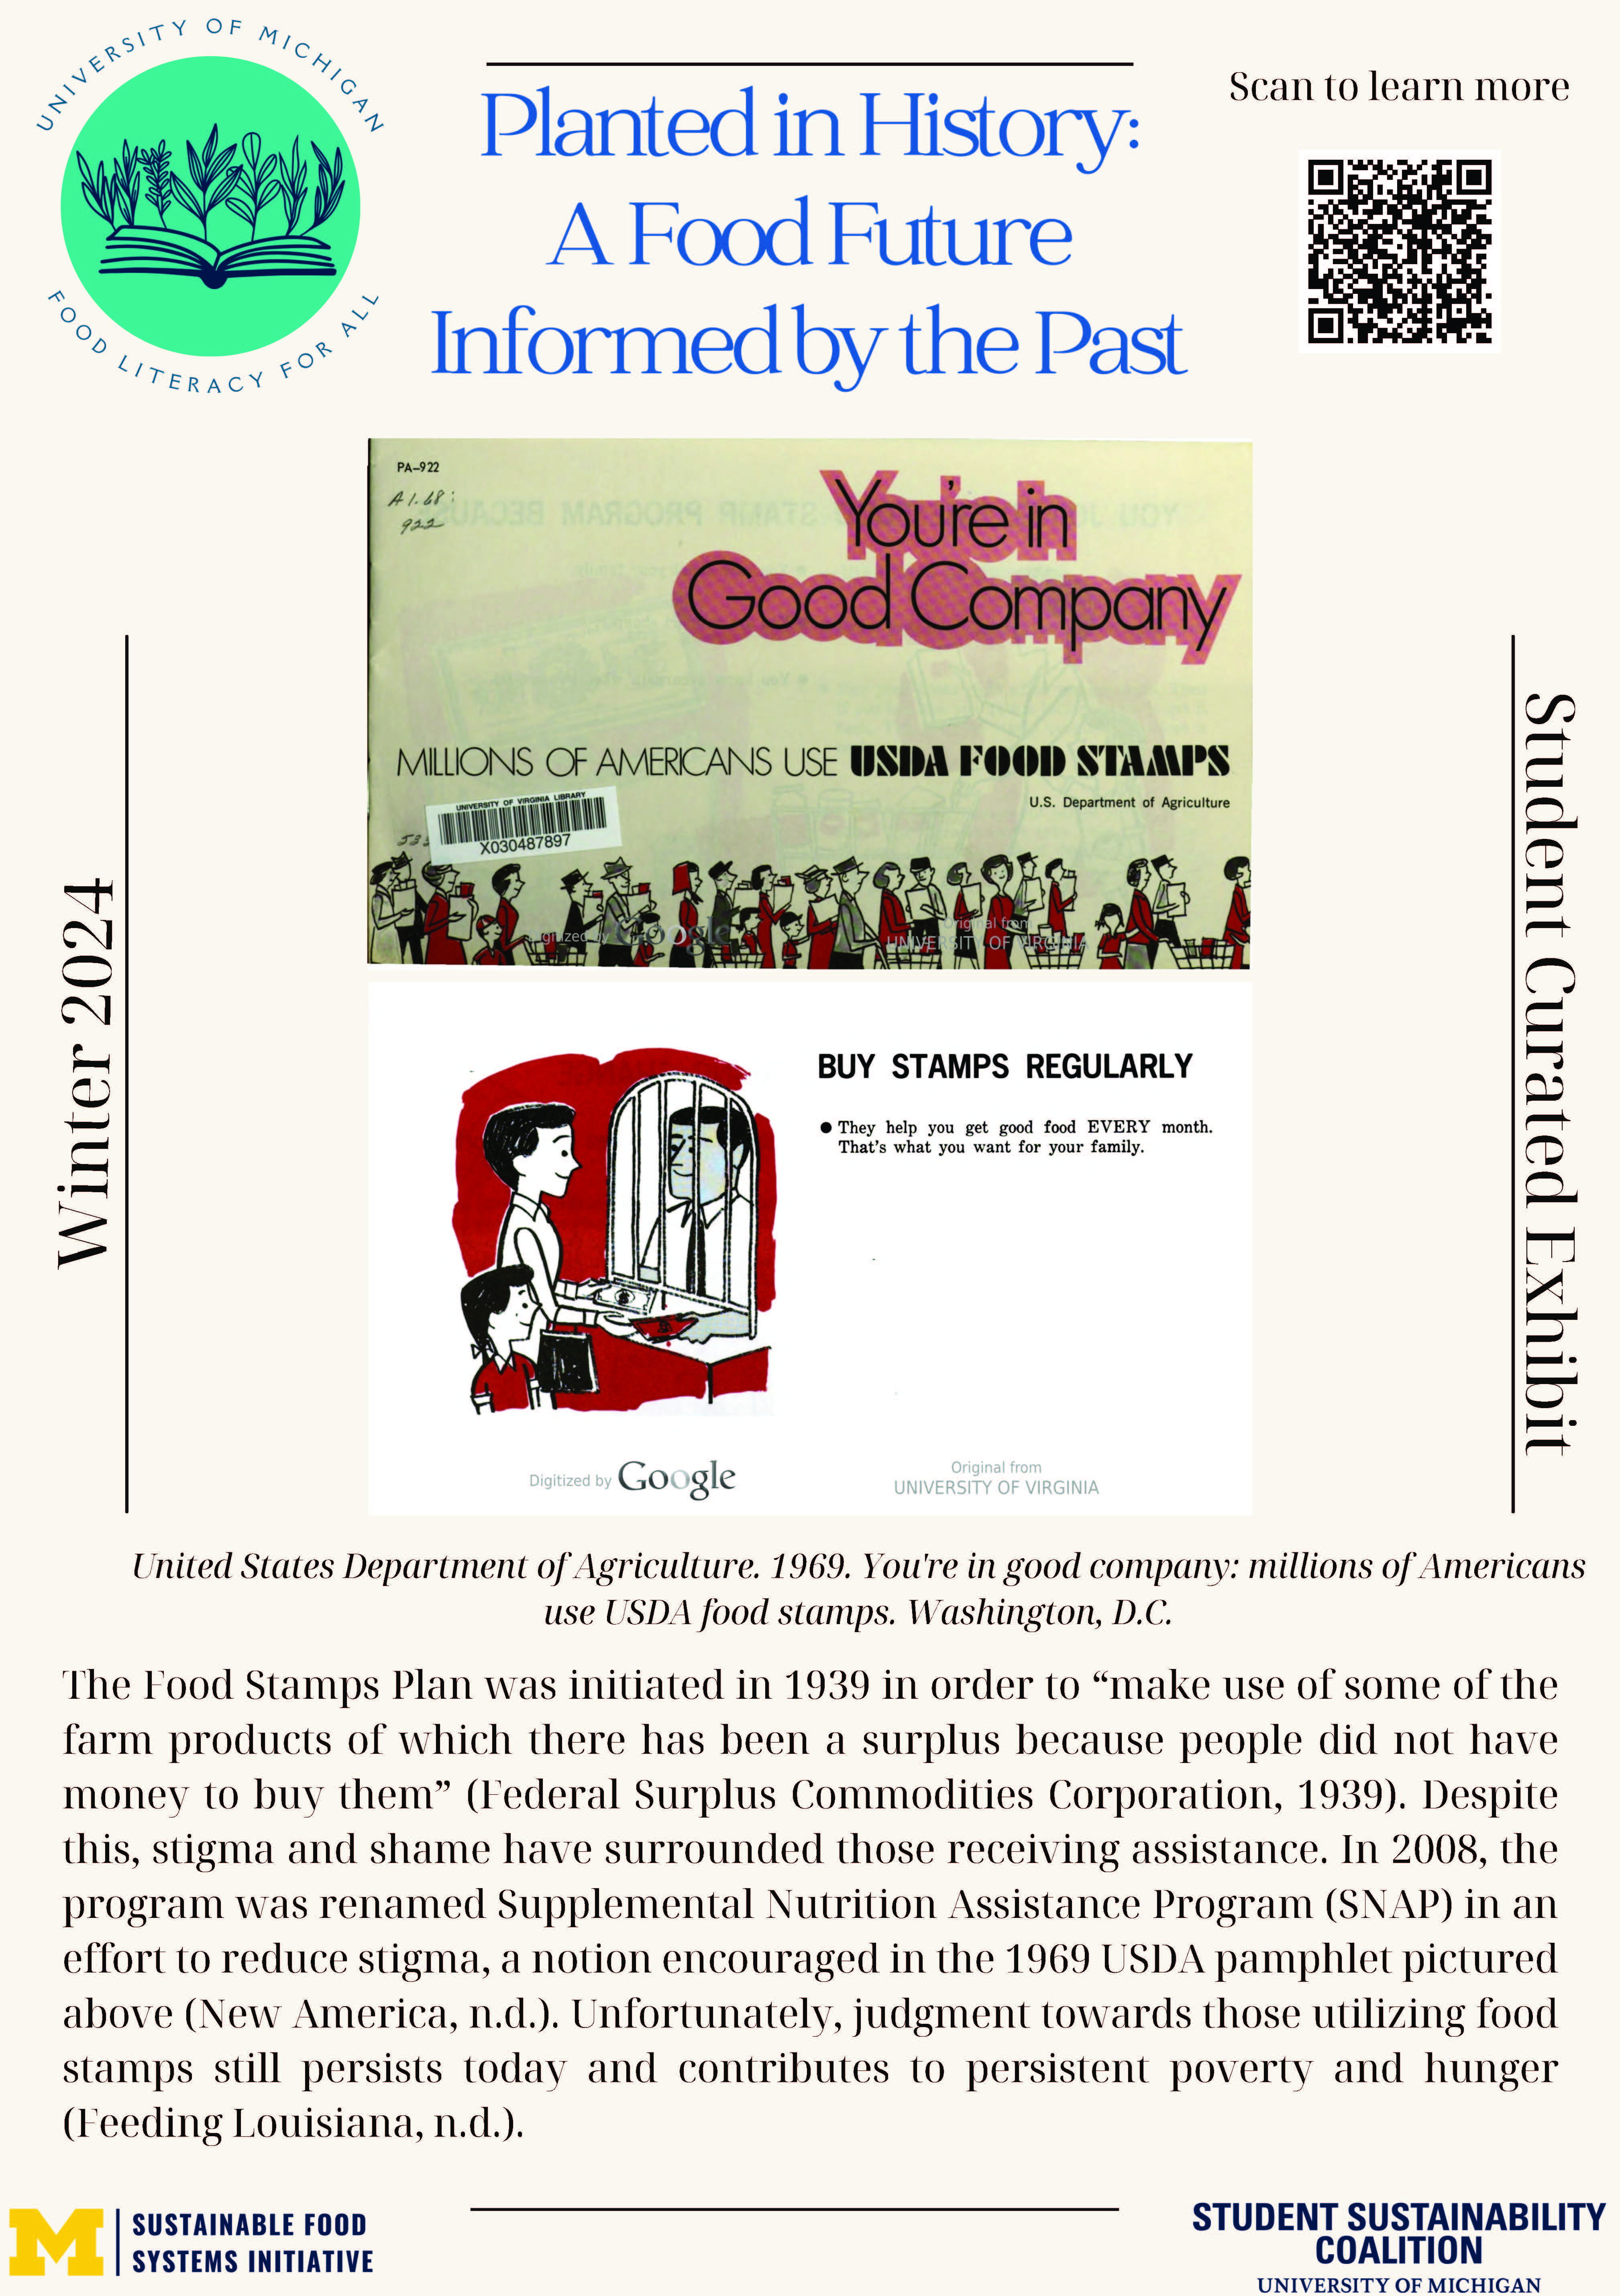 Poster highlighting a USDA publication "You're in Good Company: Millions of Americans use USDA food stamps"(1969) showing a cartoon sketch of a owman and young girl receiving red tickets from a man behind a counter, and many people in line with grocery carts, original from the University of Virginia. Main text in caption. 